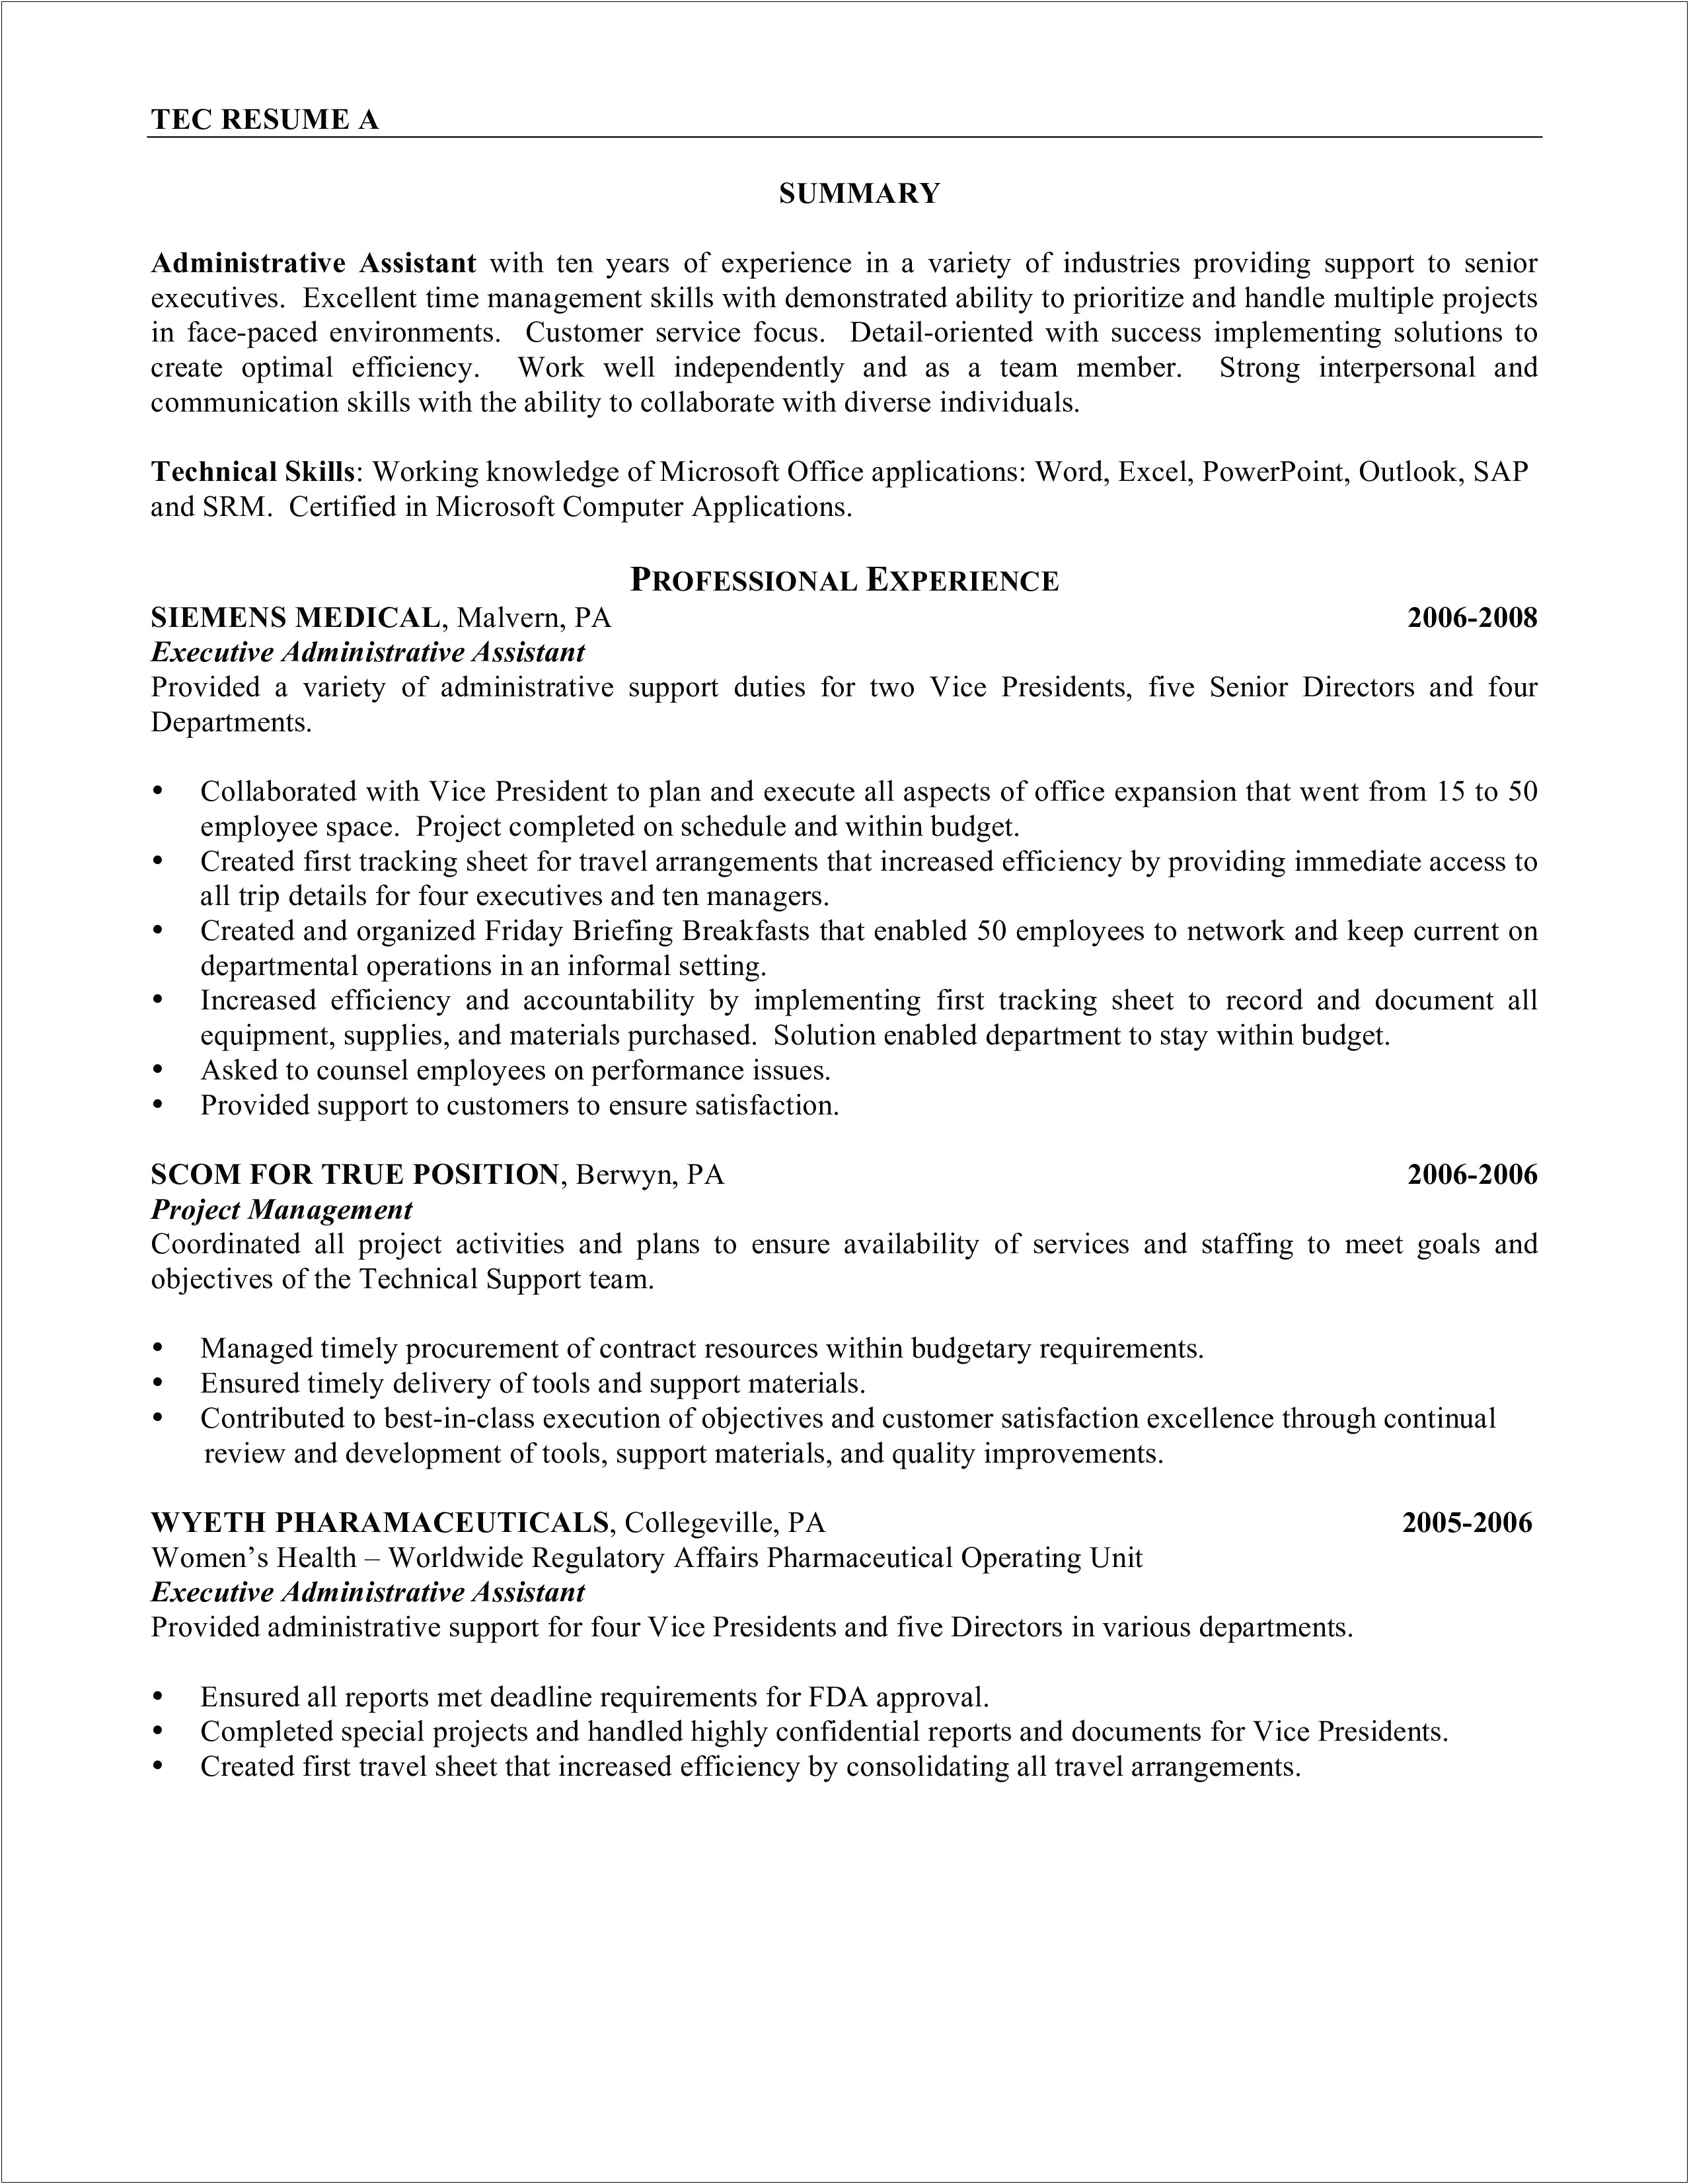 Resume Objectives For Executive Administrative Assistant